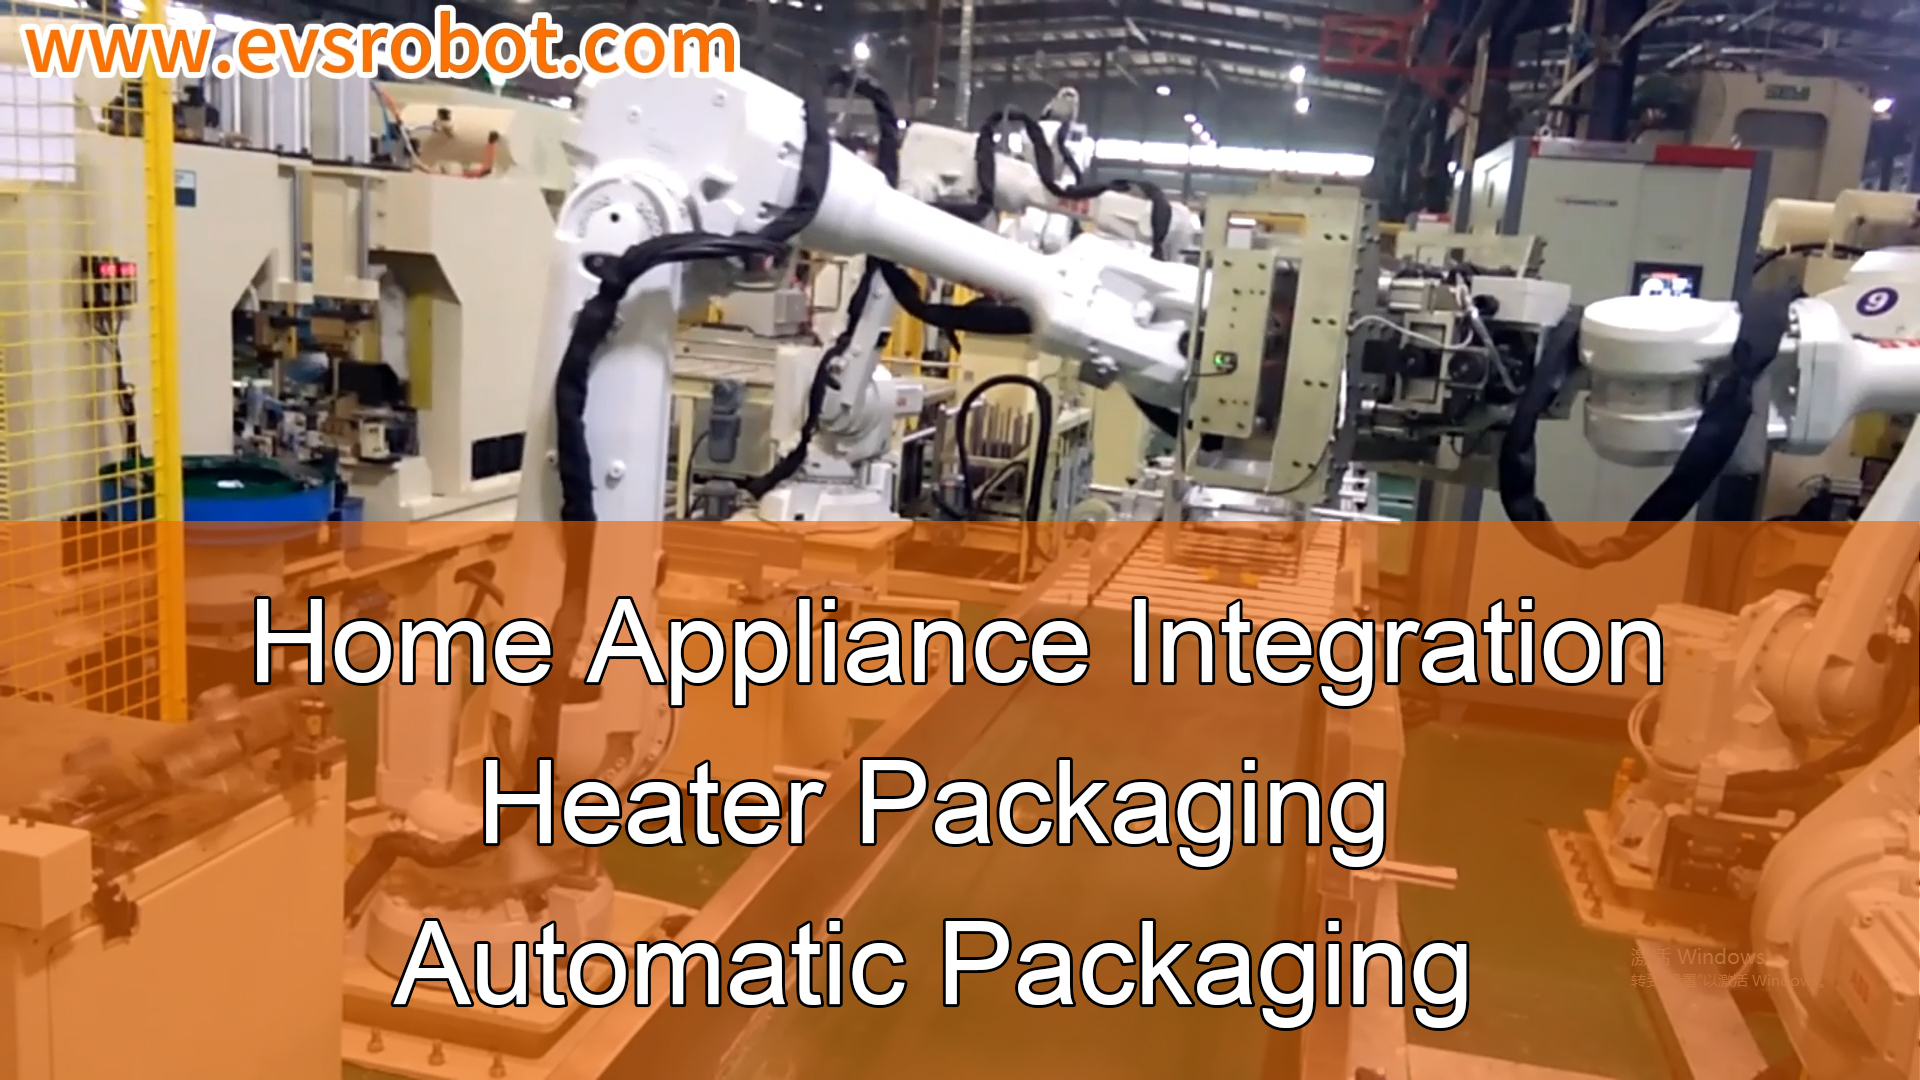 Home Appliance Integration | Heater Packaging | Automatic Packaging